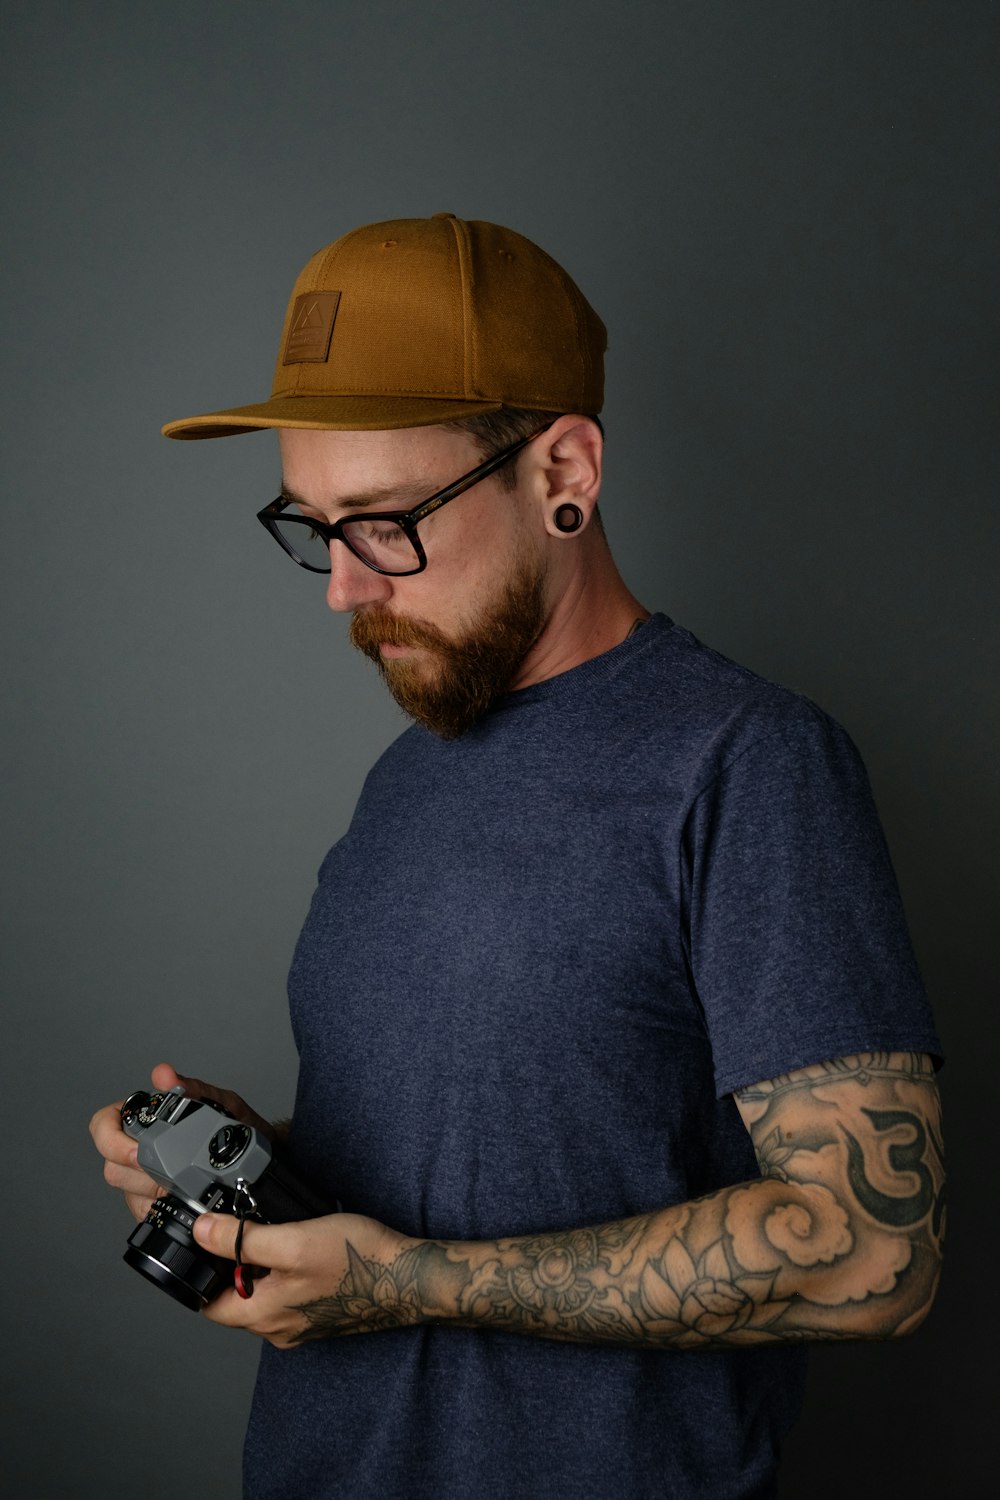 man in blue crew neck shirt wearing brown cap holding black and silver dslr camera